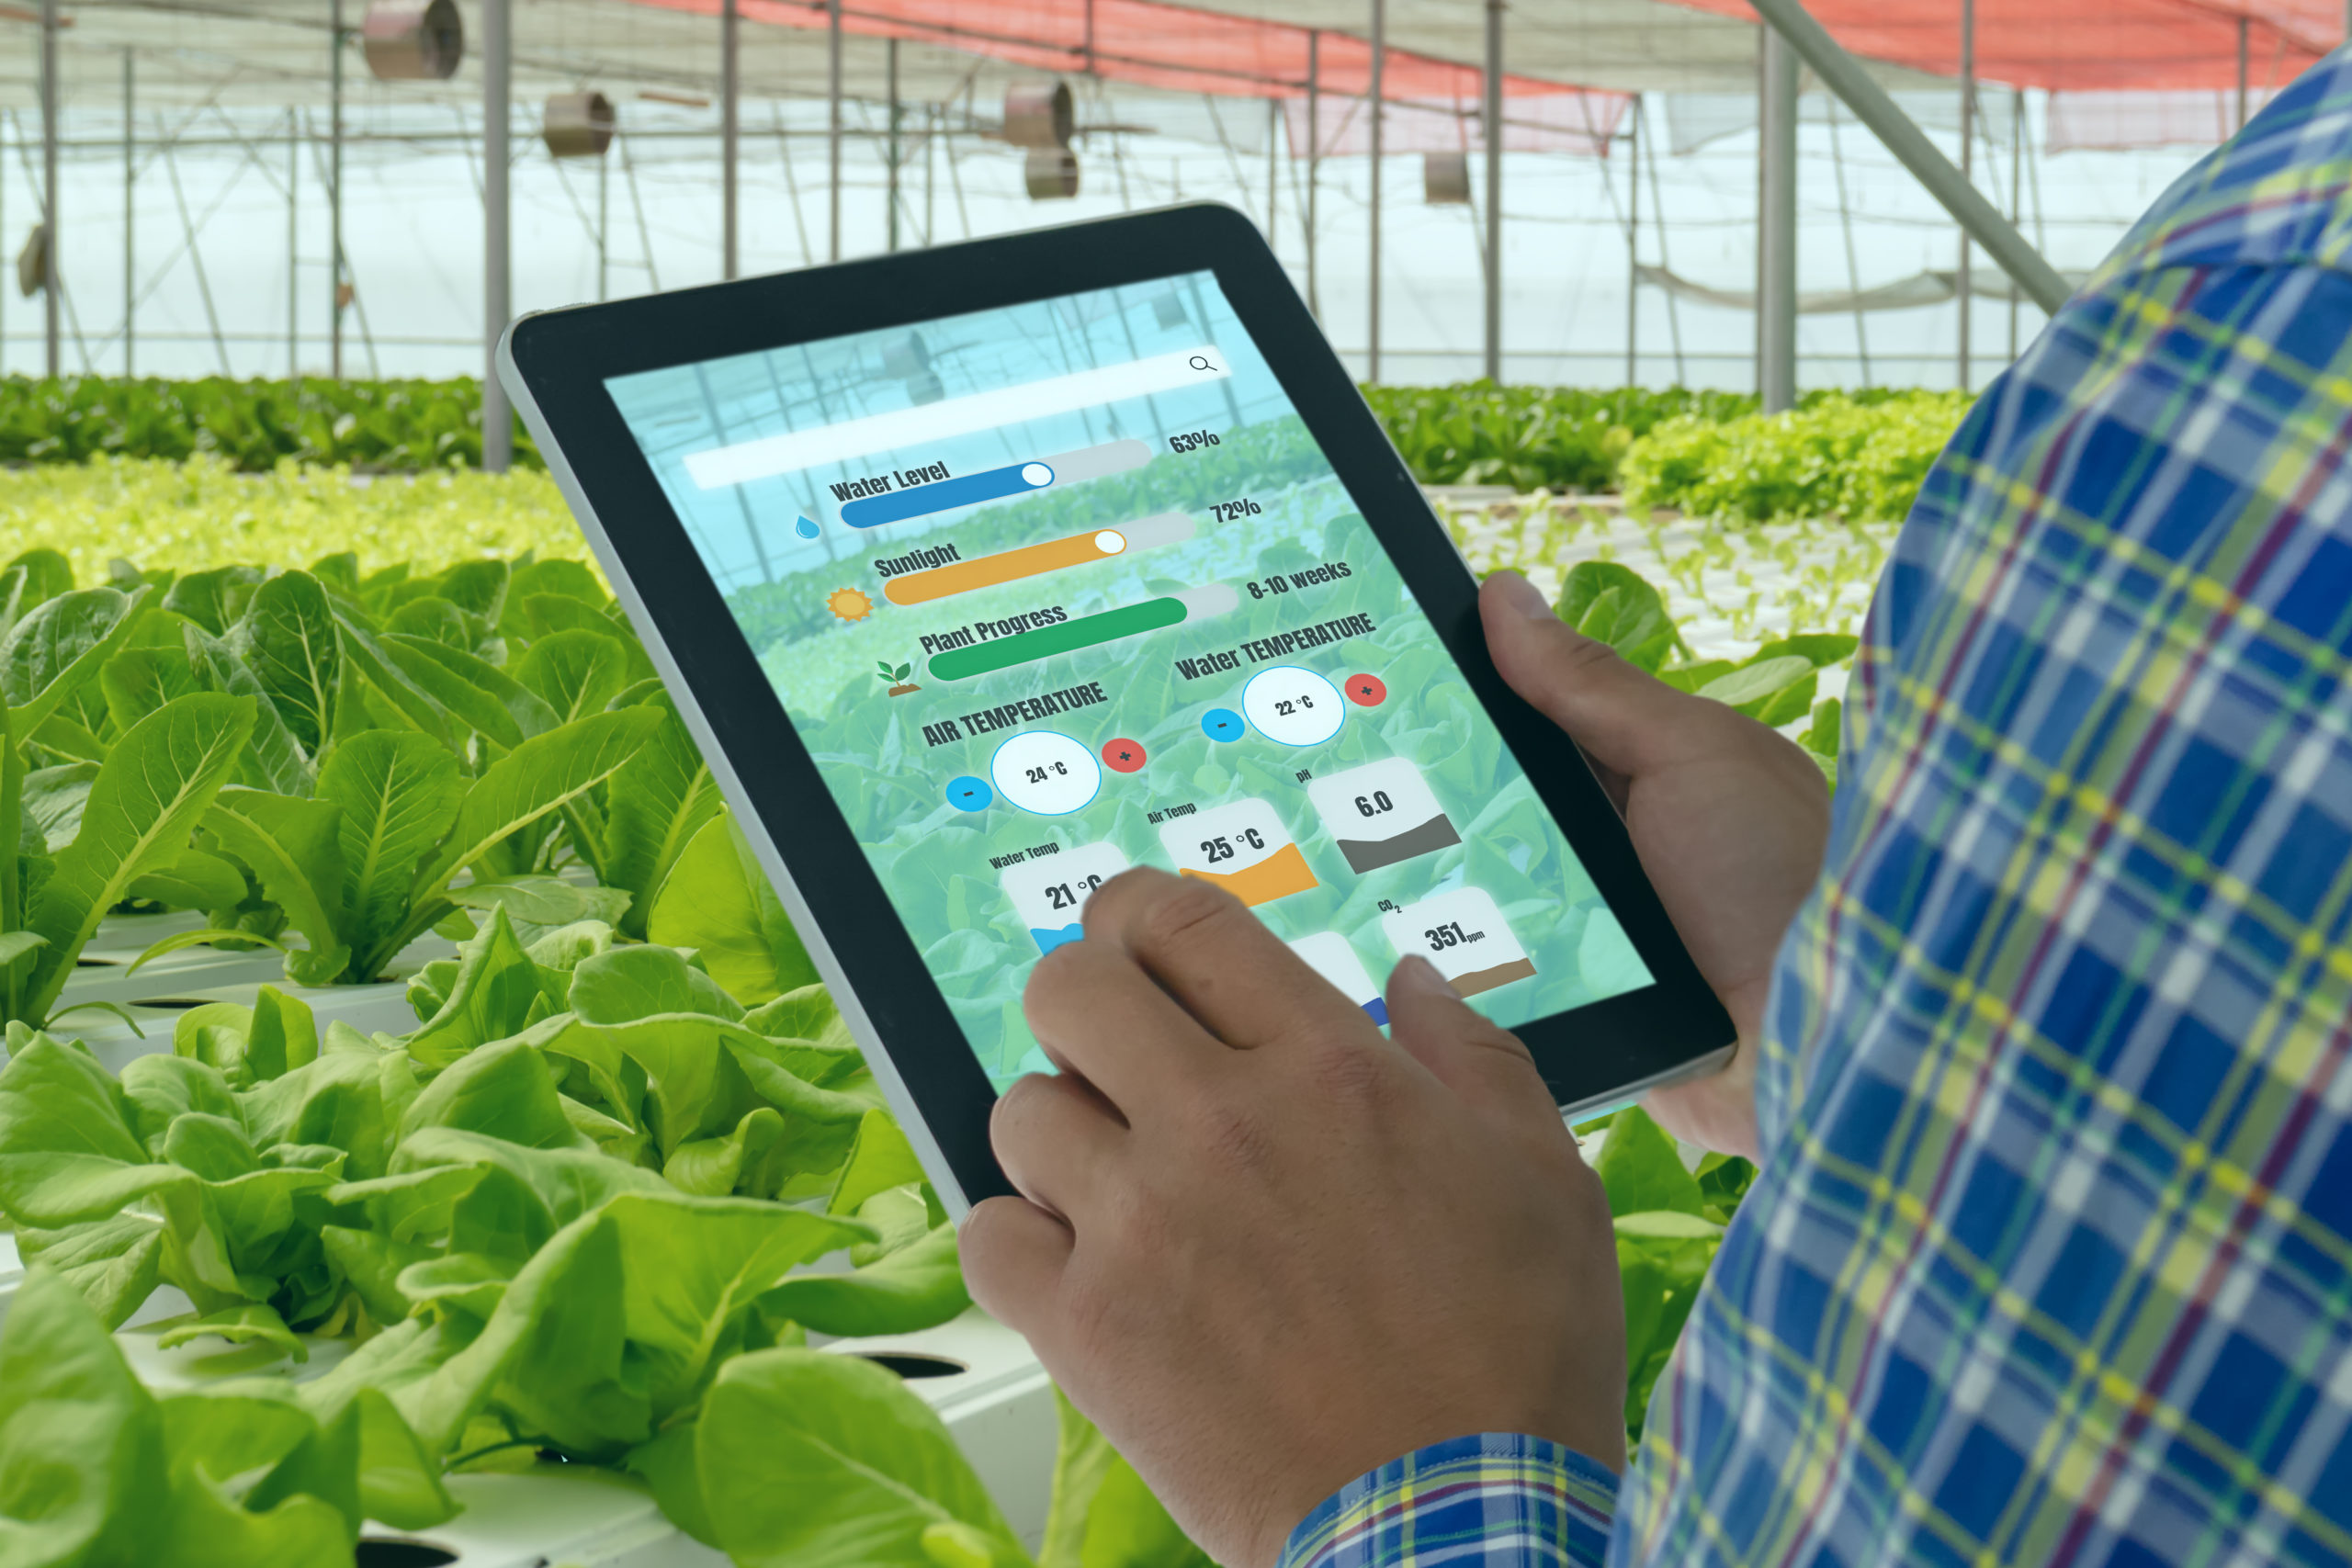 Farmers views pre generated statistics on a tablet while inside a greenhouse